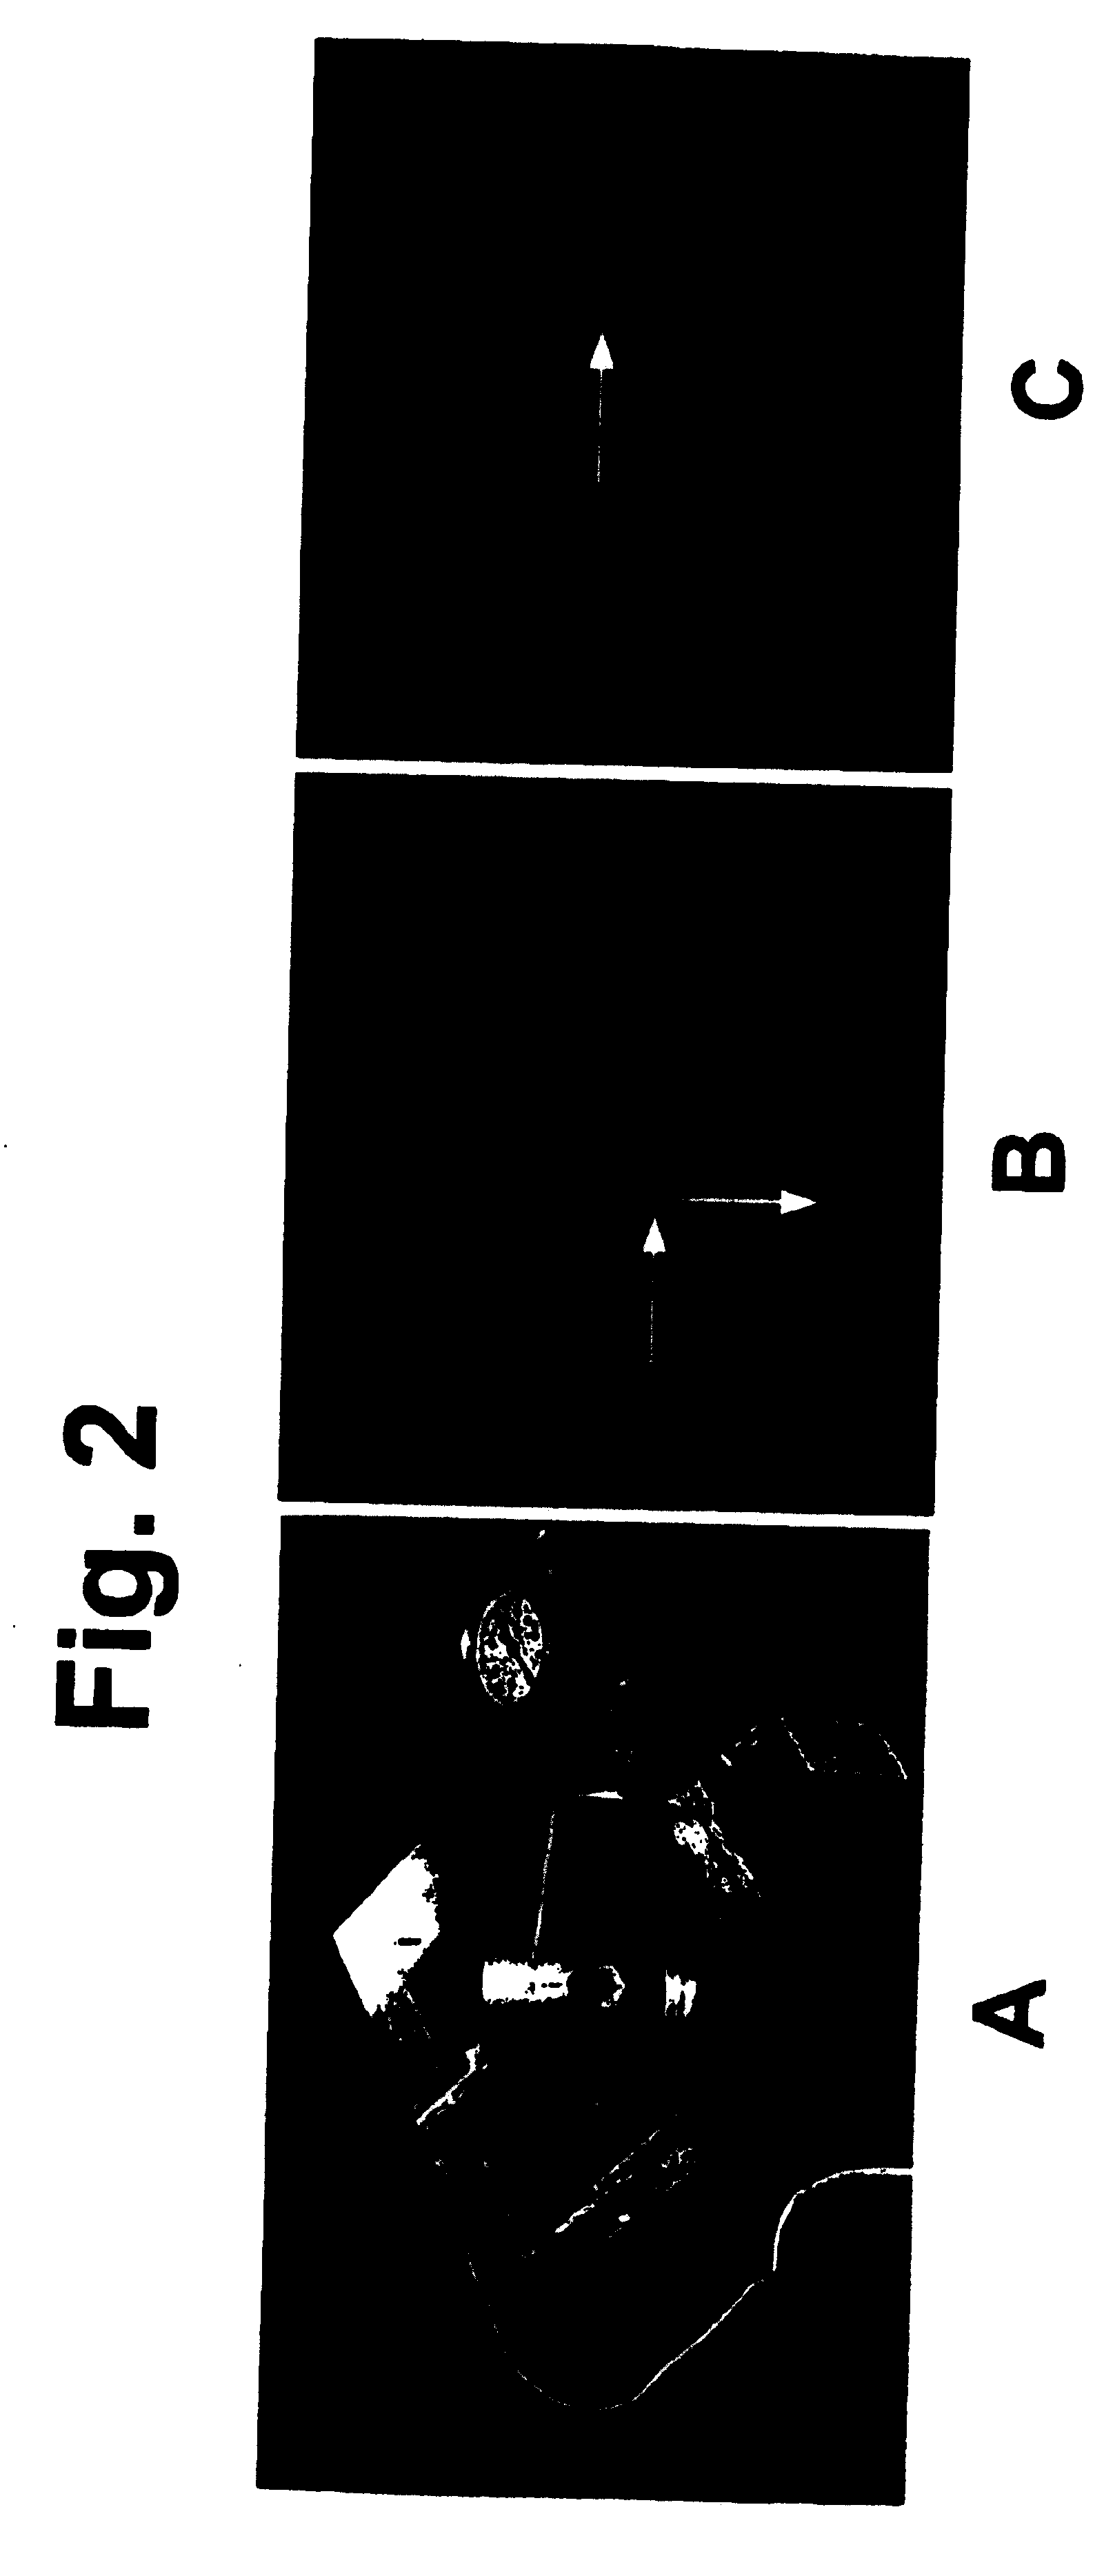 Circulating microfluidic pump system for chemical or biological agents